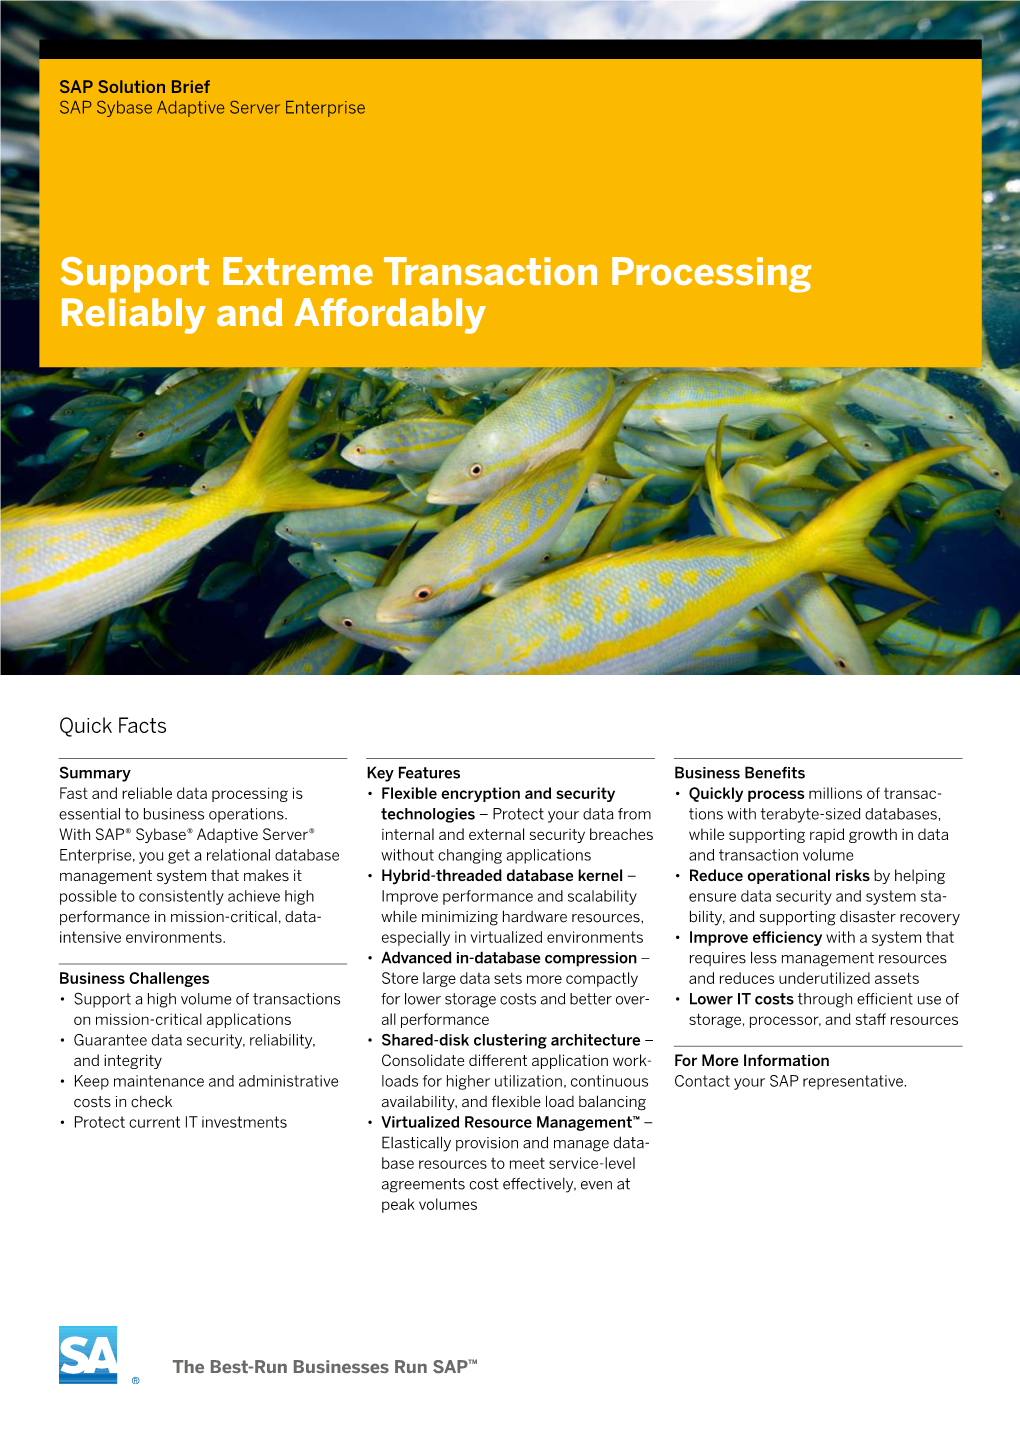 Support Extreme Transaction Processing Reliably and Affordably